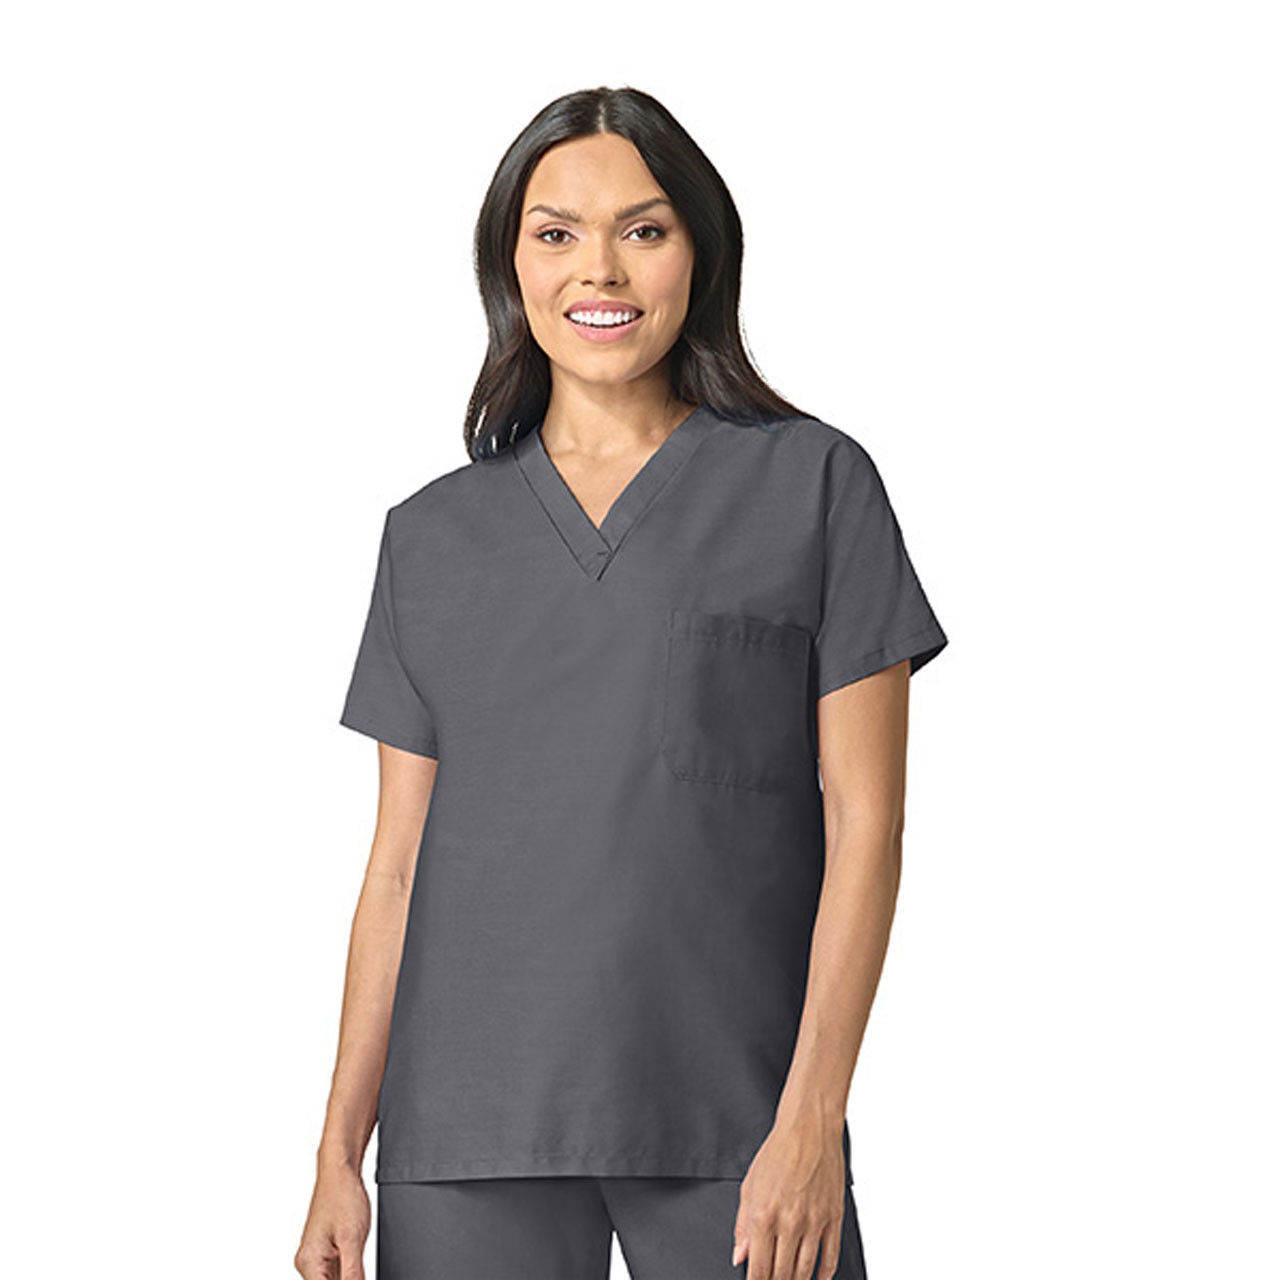 How many Pewter Gray Scrub Tops come in a case?